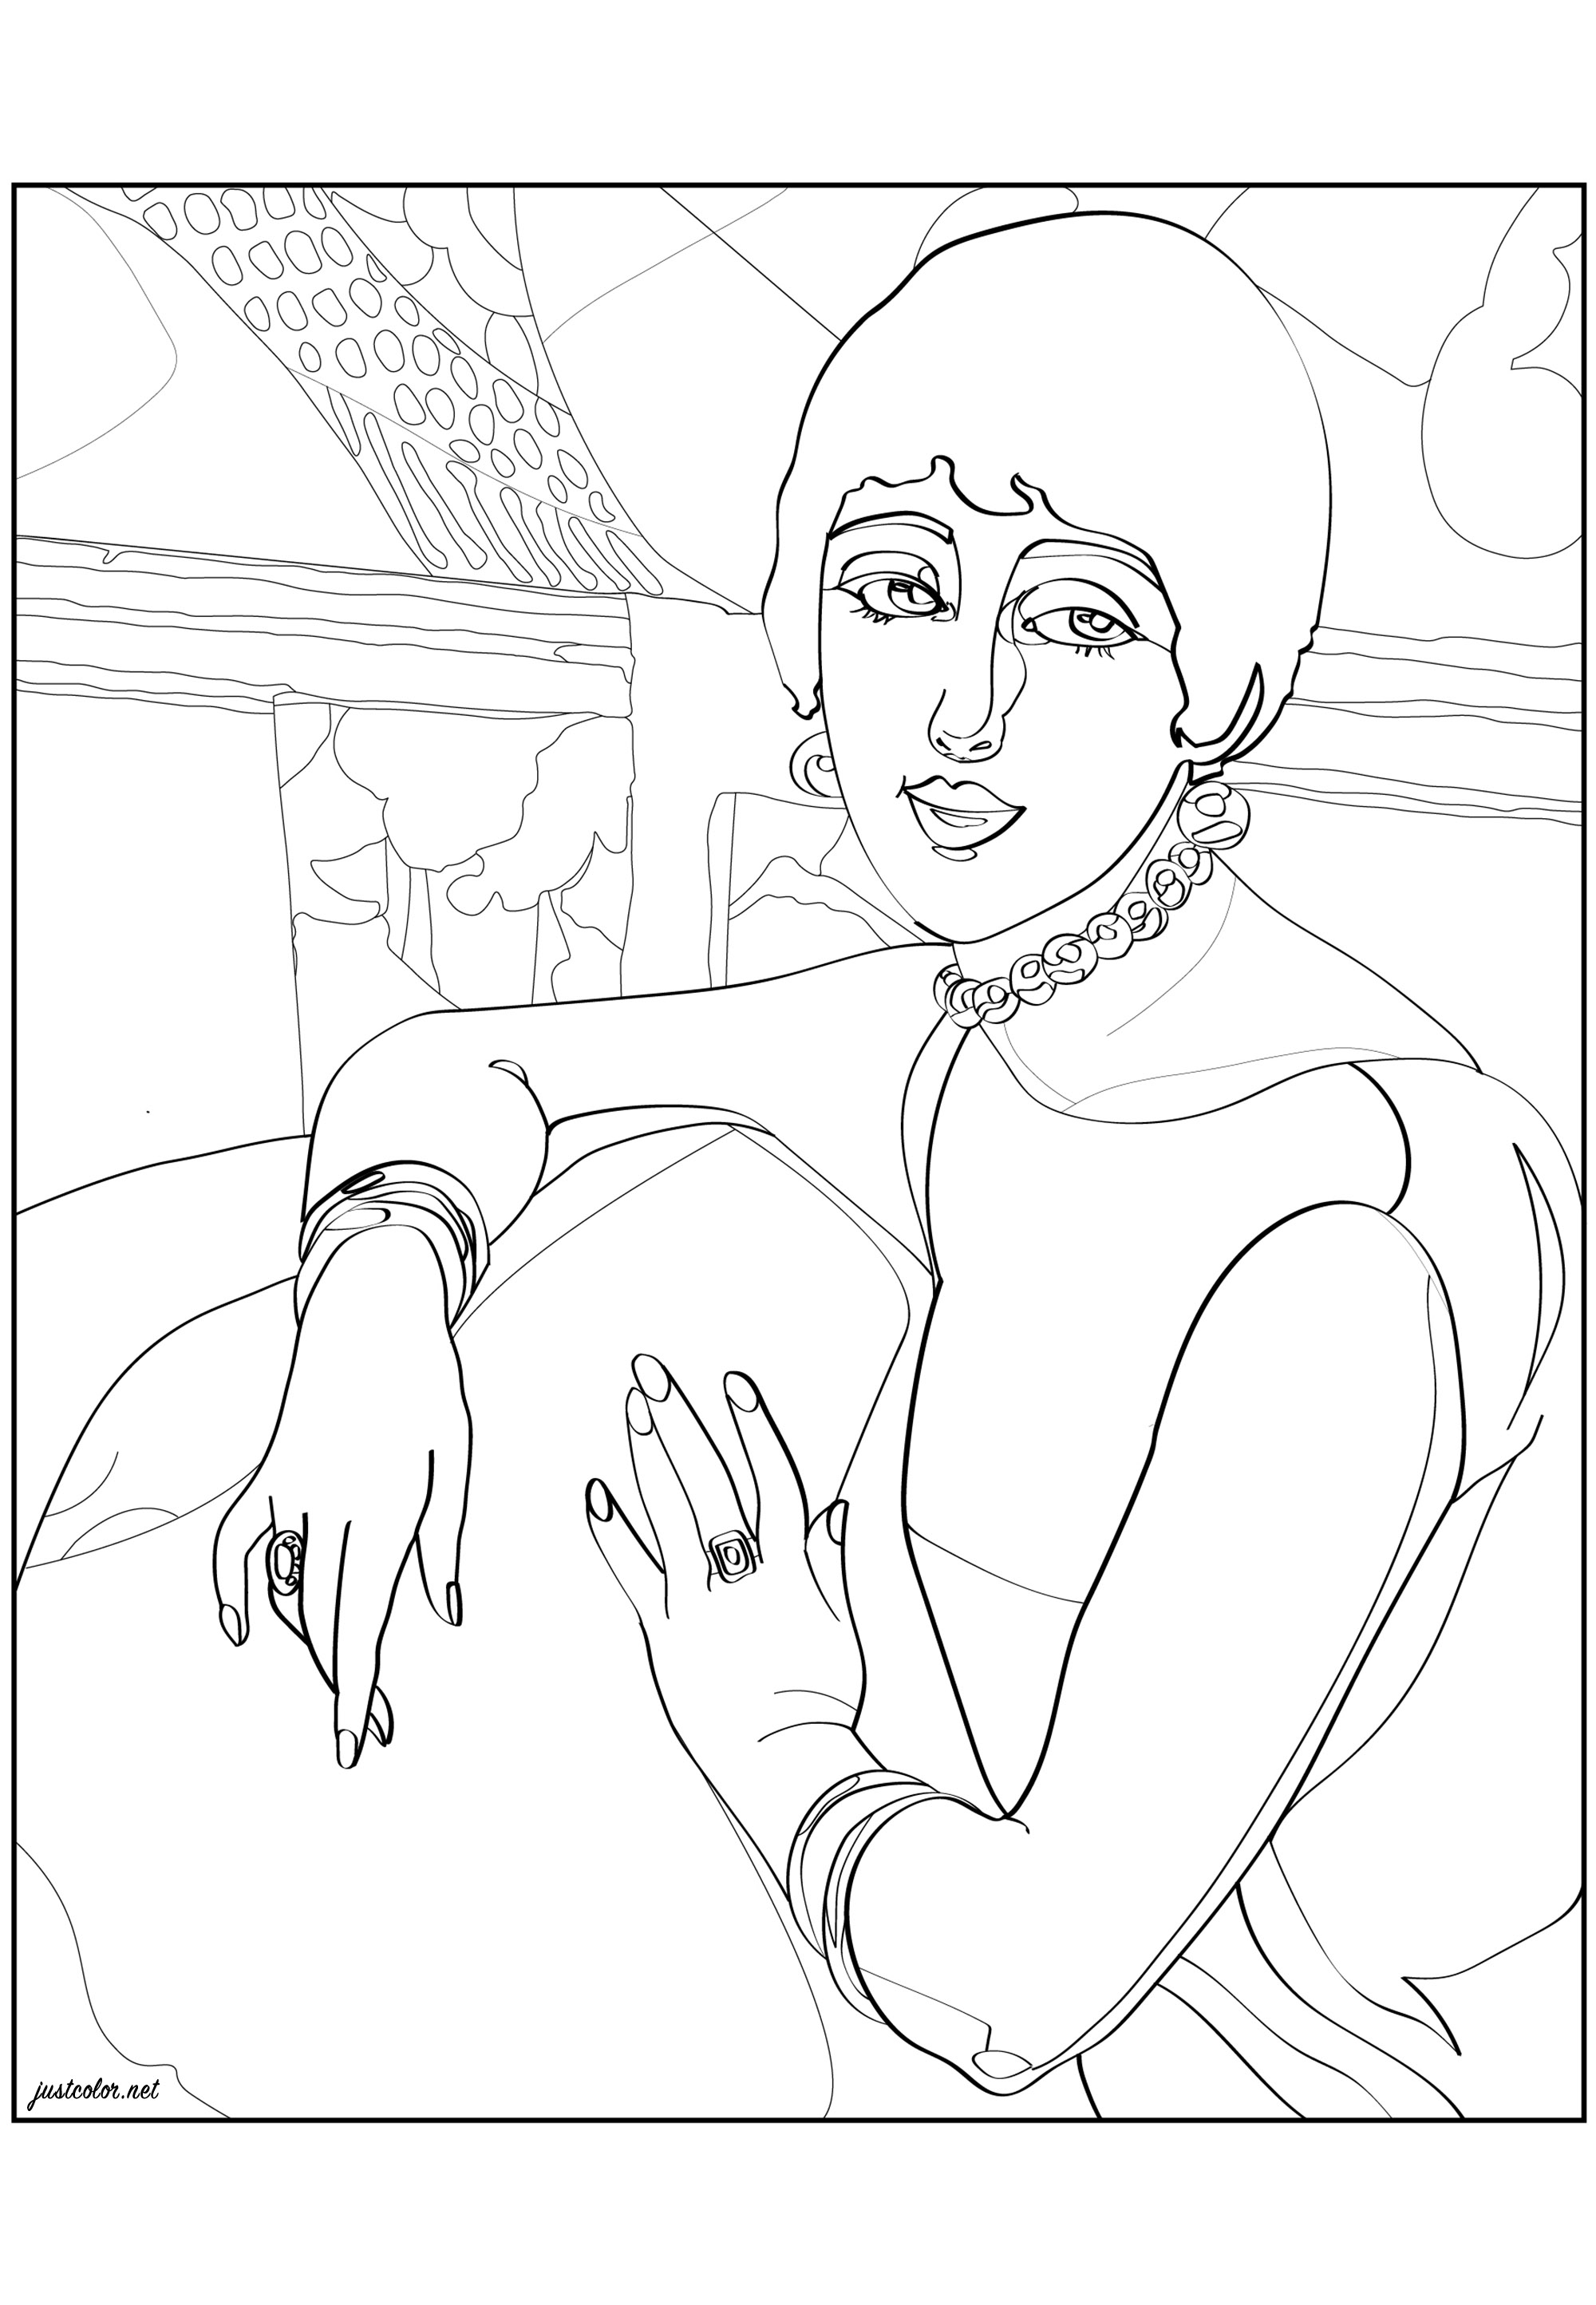 Coloring page created from Gerda Webener's painting 'Lily' (1922). Wegener (Danish illustrator and painter) is known for her fashion illustrations in a unique Art Deco or sometimes Art Nouveau style, and also for her paintings that pushed the boundaries of gender and love of her time. These works were classified as lesbian erotica at times and many were inspired by her partner, the transgender woman Lili Elbe.